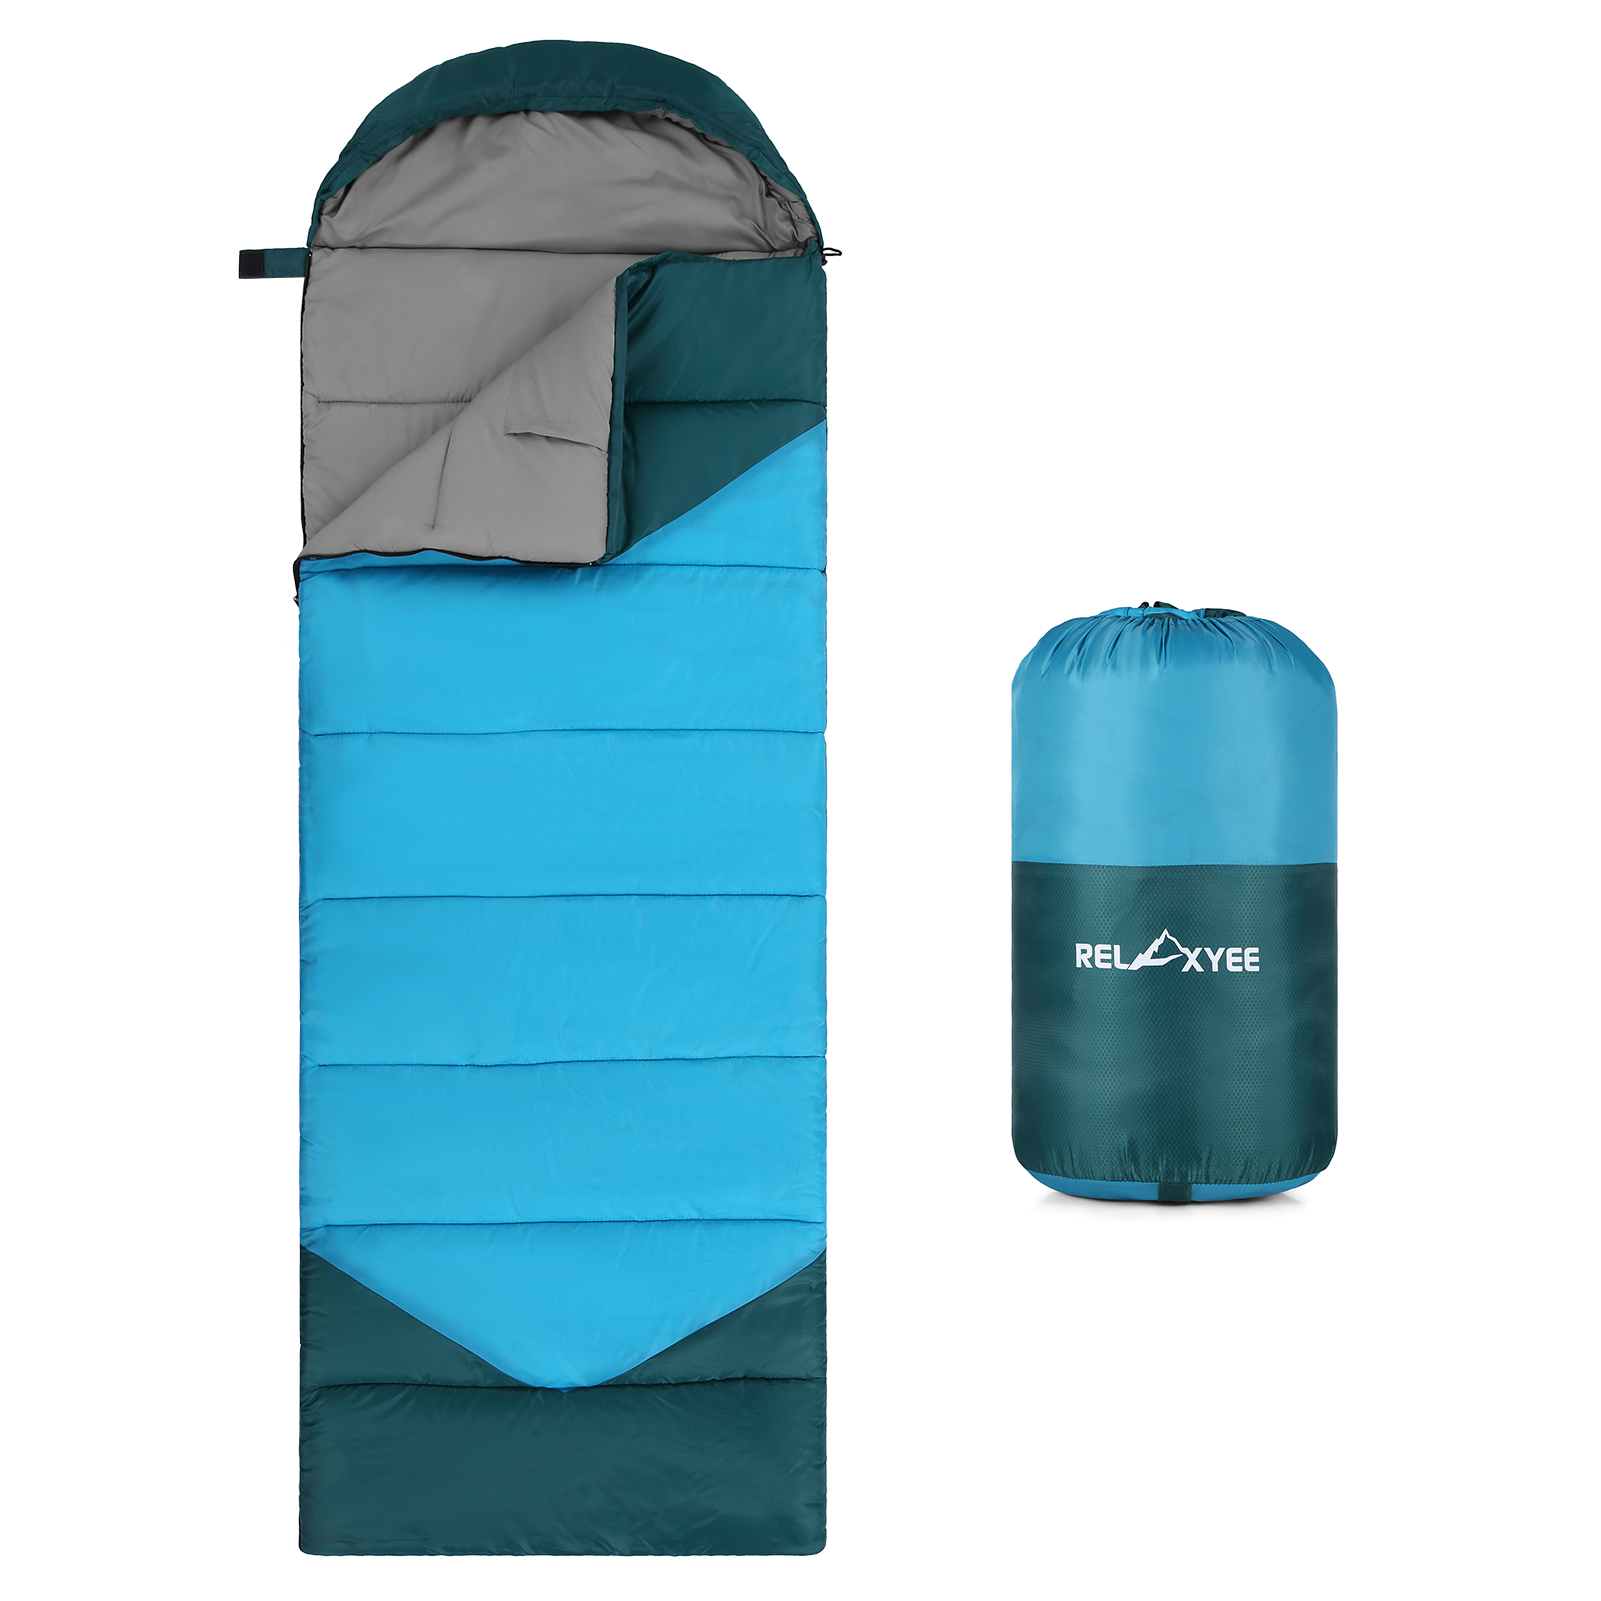 Viking Trek 350x Lightweight Sleeping Bag Warm ＆ Breathable, Ideal  Camping Gear for Hiking and Backpacking Includes 100% Waterproof Stuff  Sack